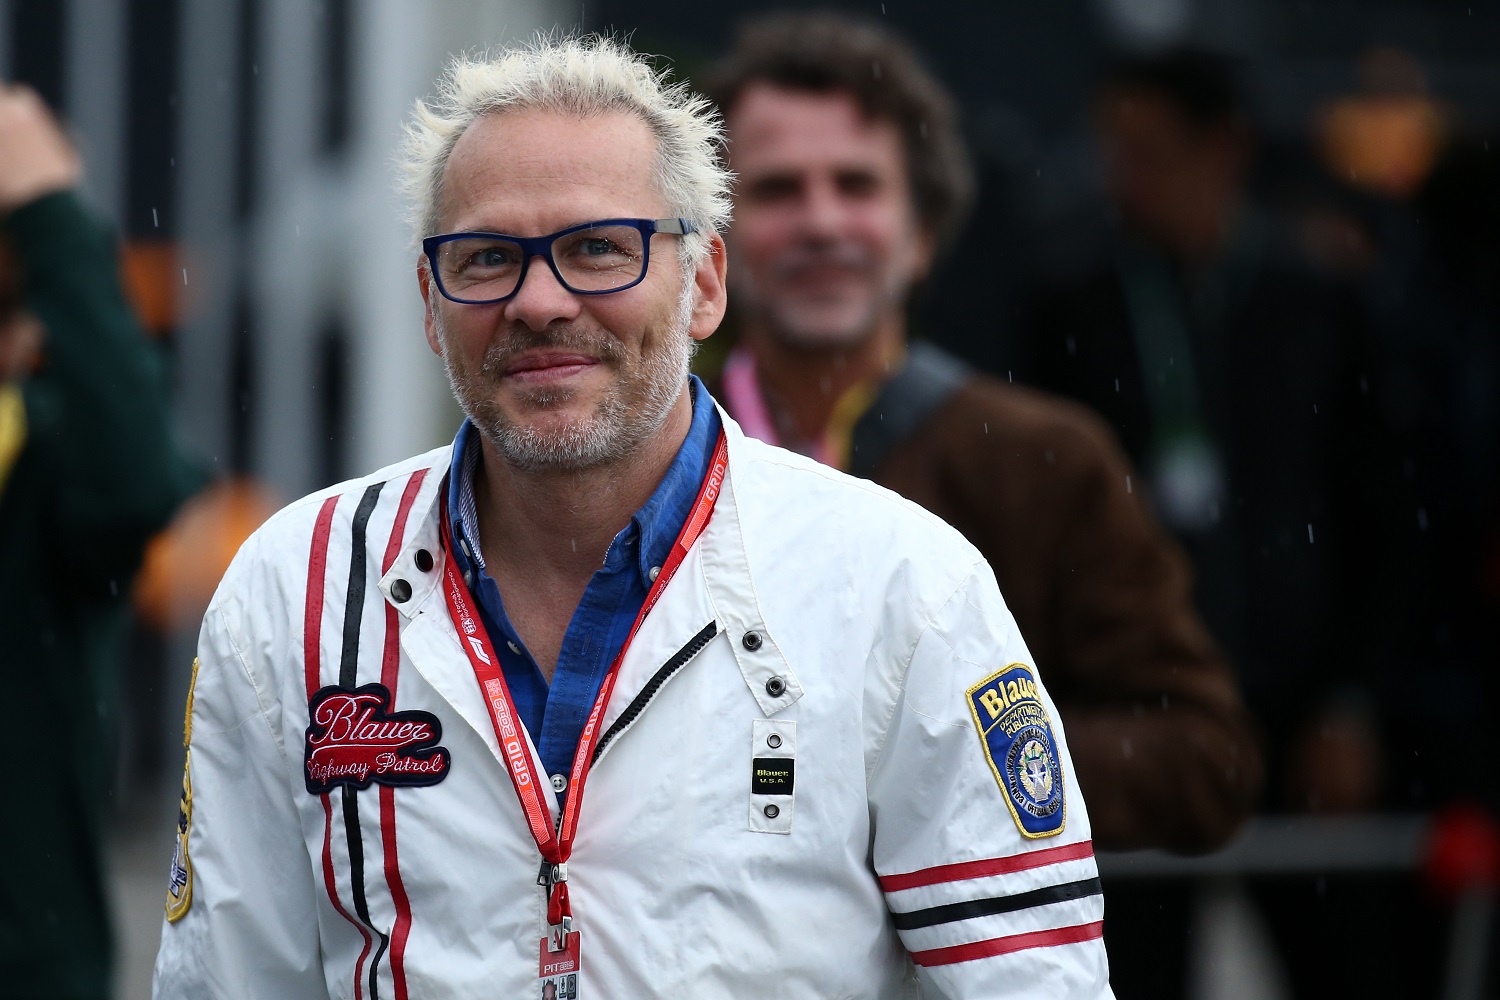 Jacques Villeneuve, seen here at the 2019 Formula 1 Grand Prix of Italy, won the 1997 World Drivers' Championship. | Marco Canoniero/LightRocket via Getty Images